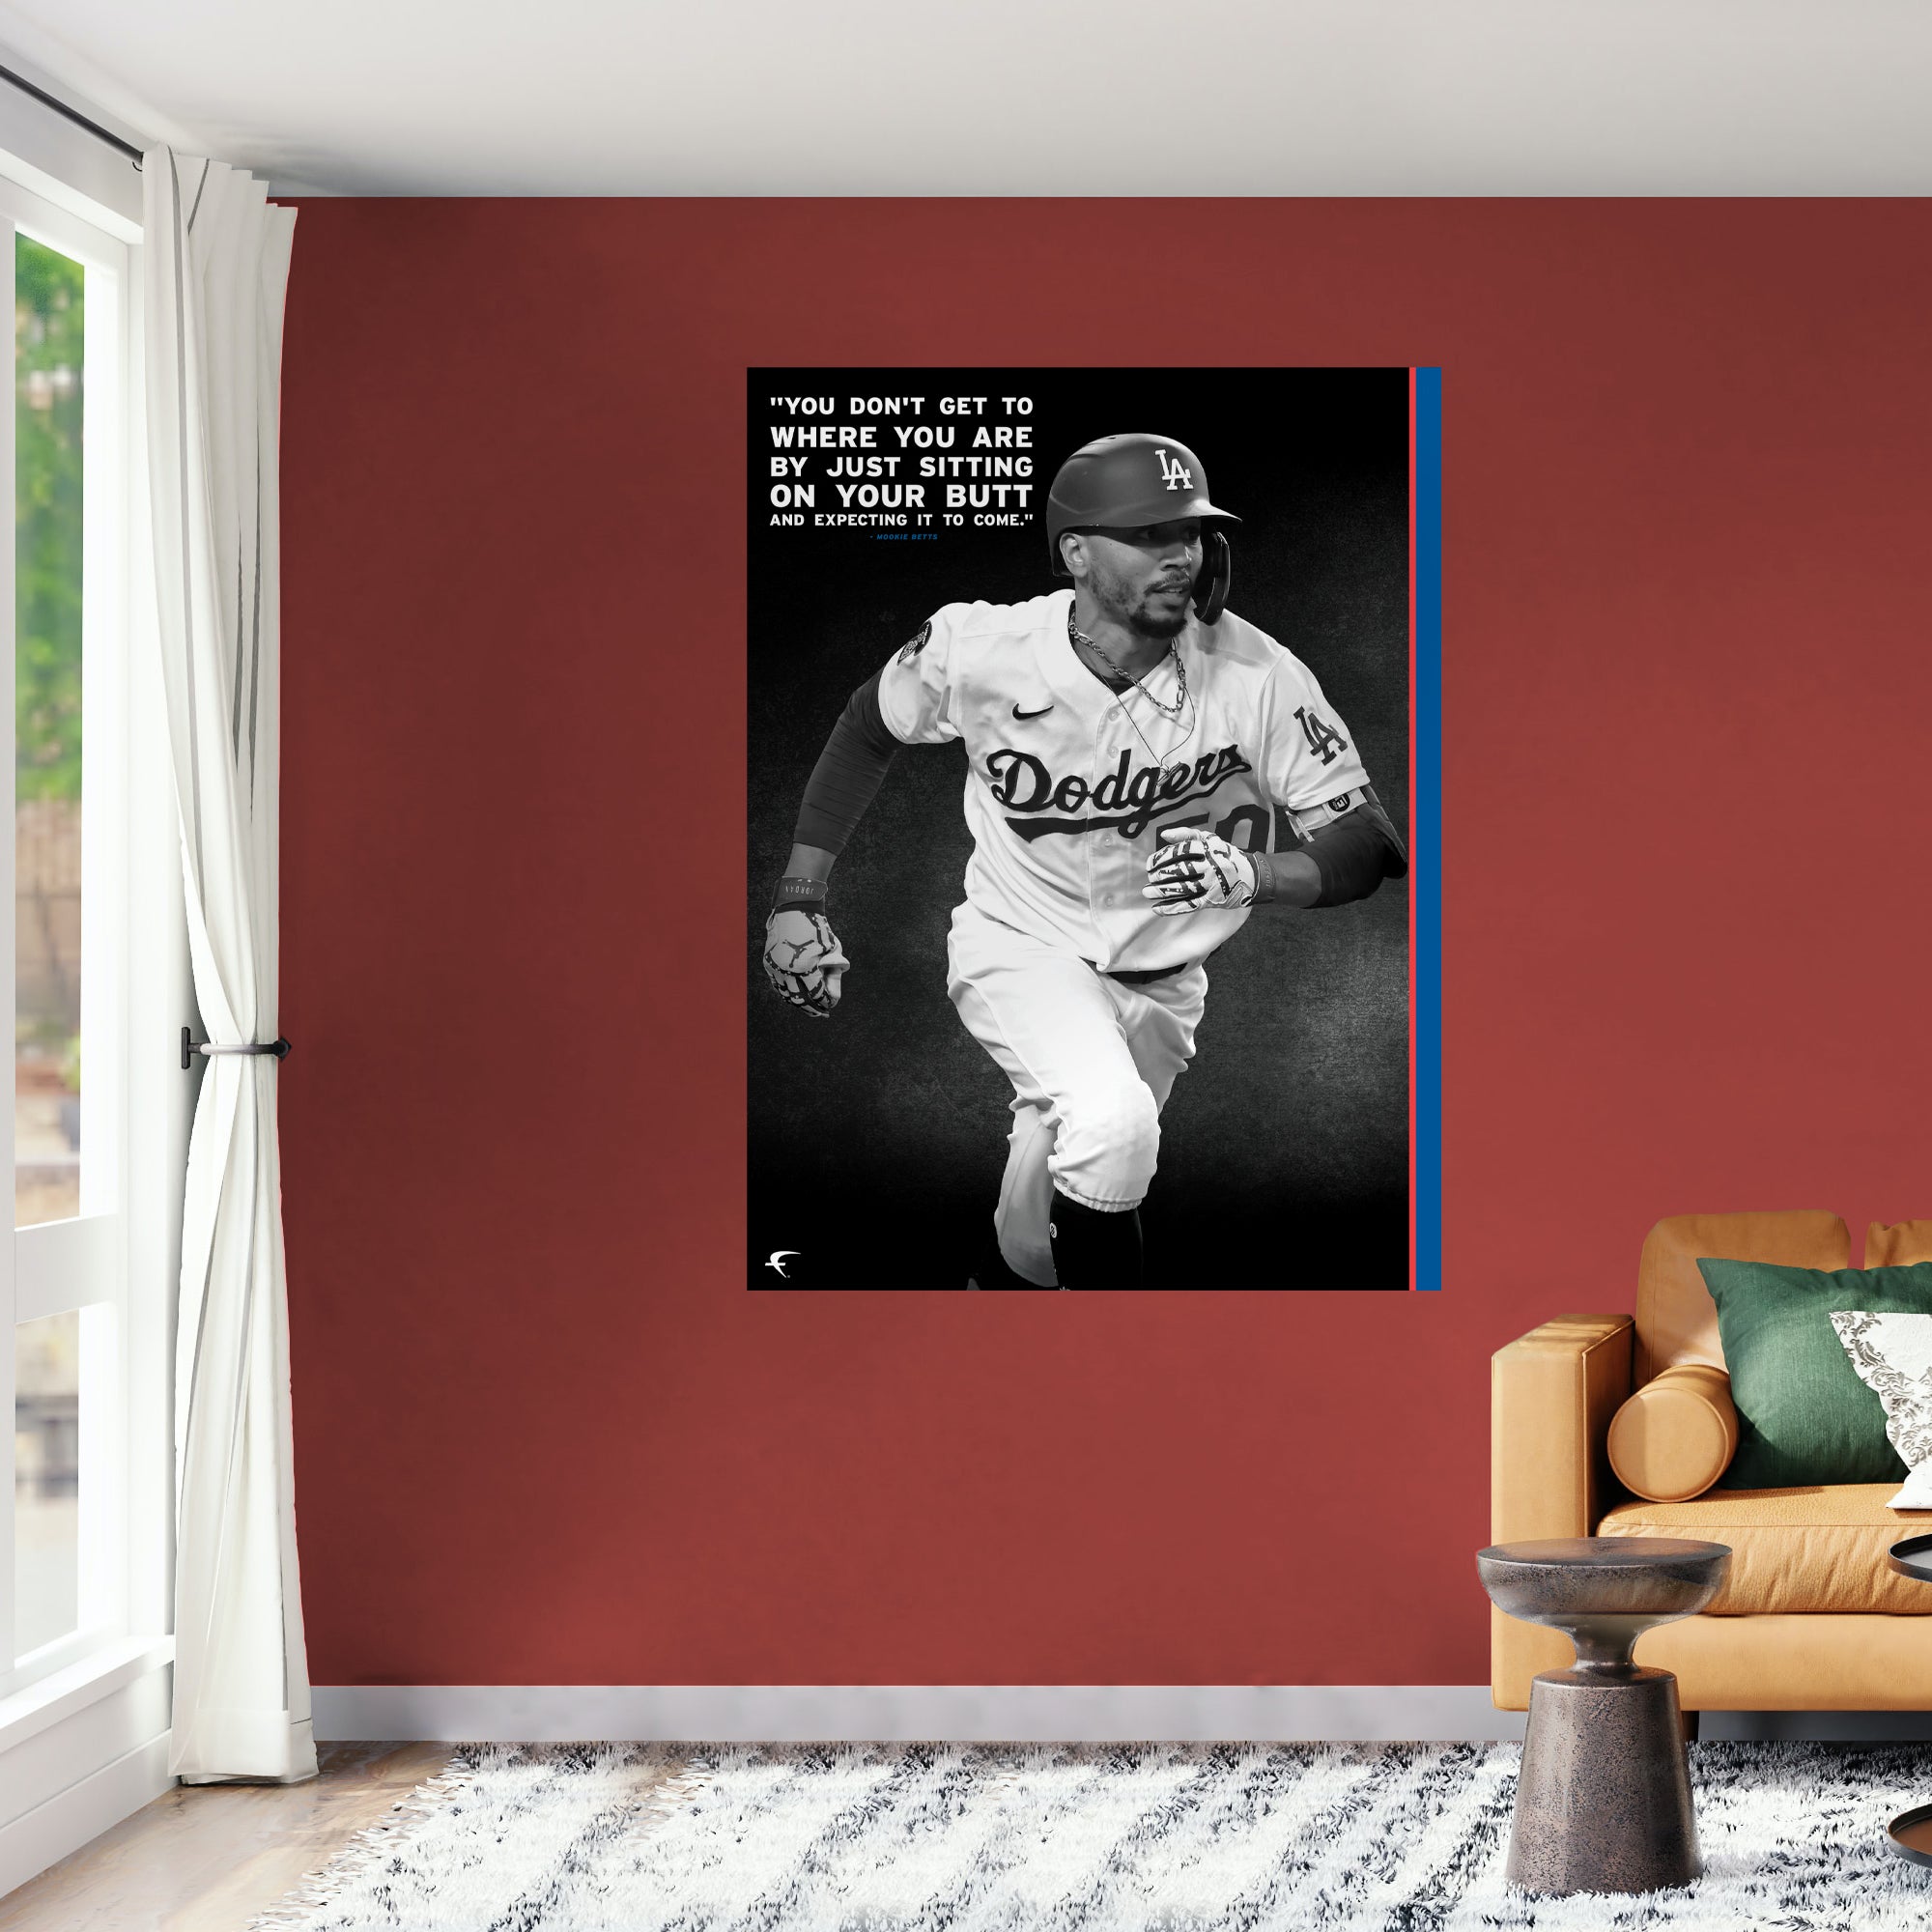  LVTFCO Mookie Betts Poster Dodgers For Walls Red Sox